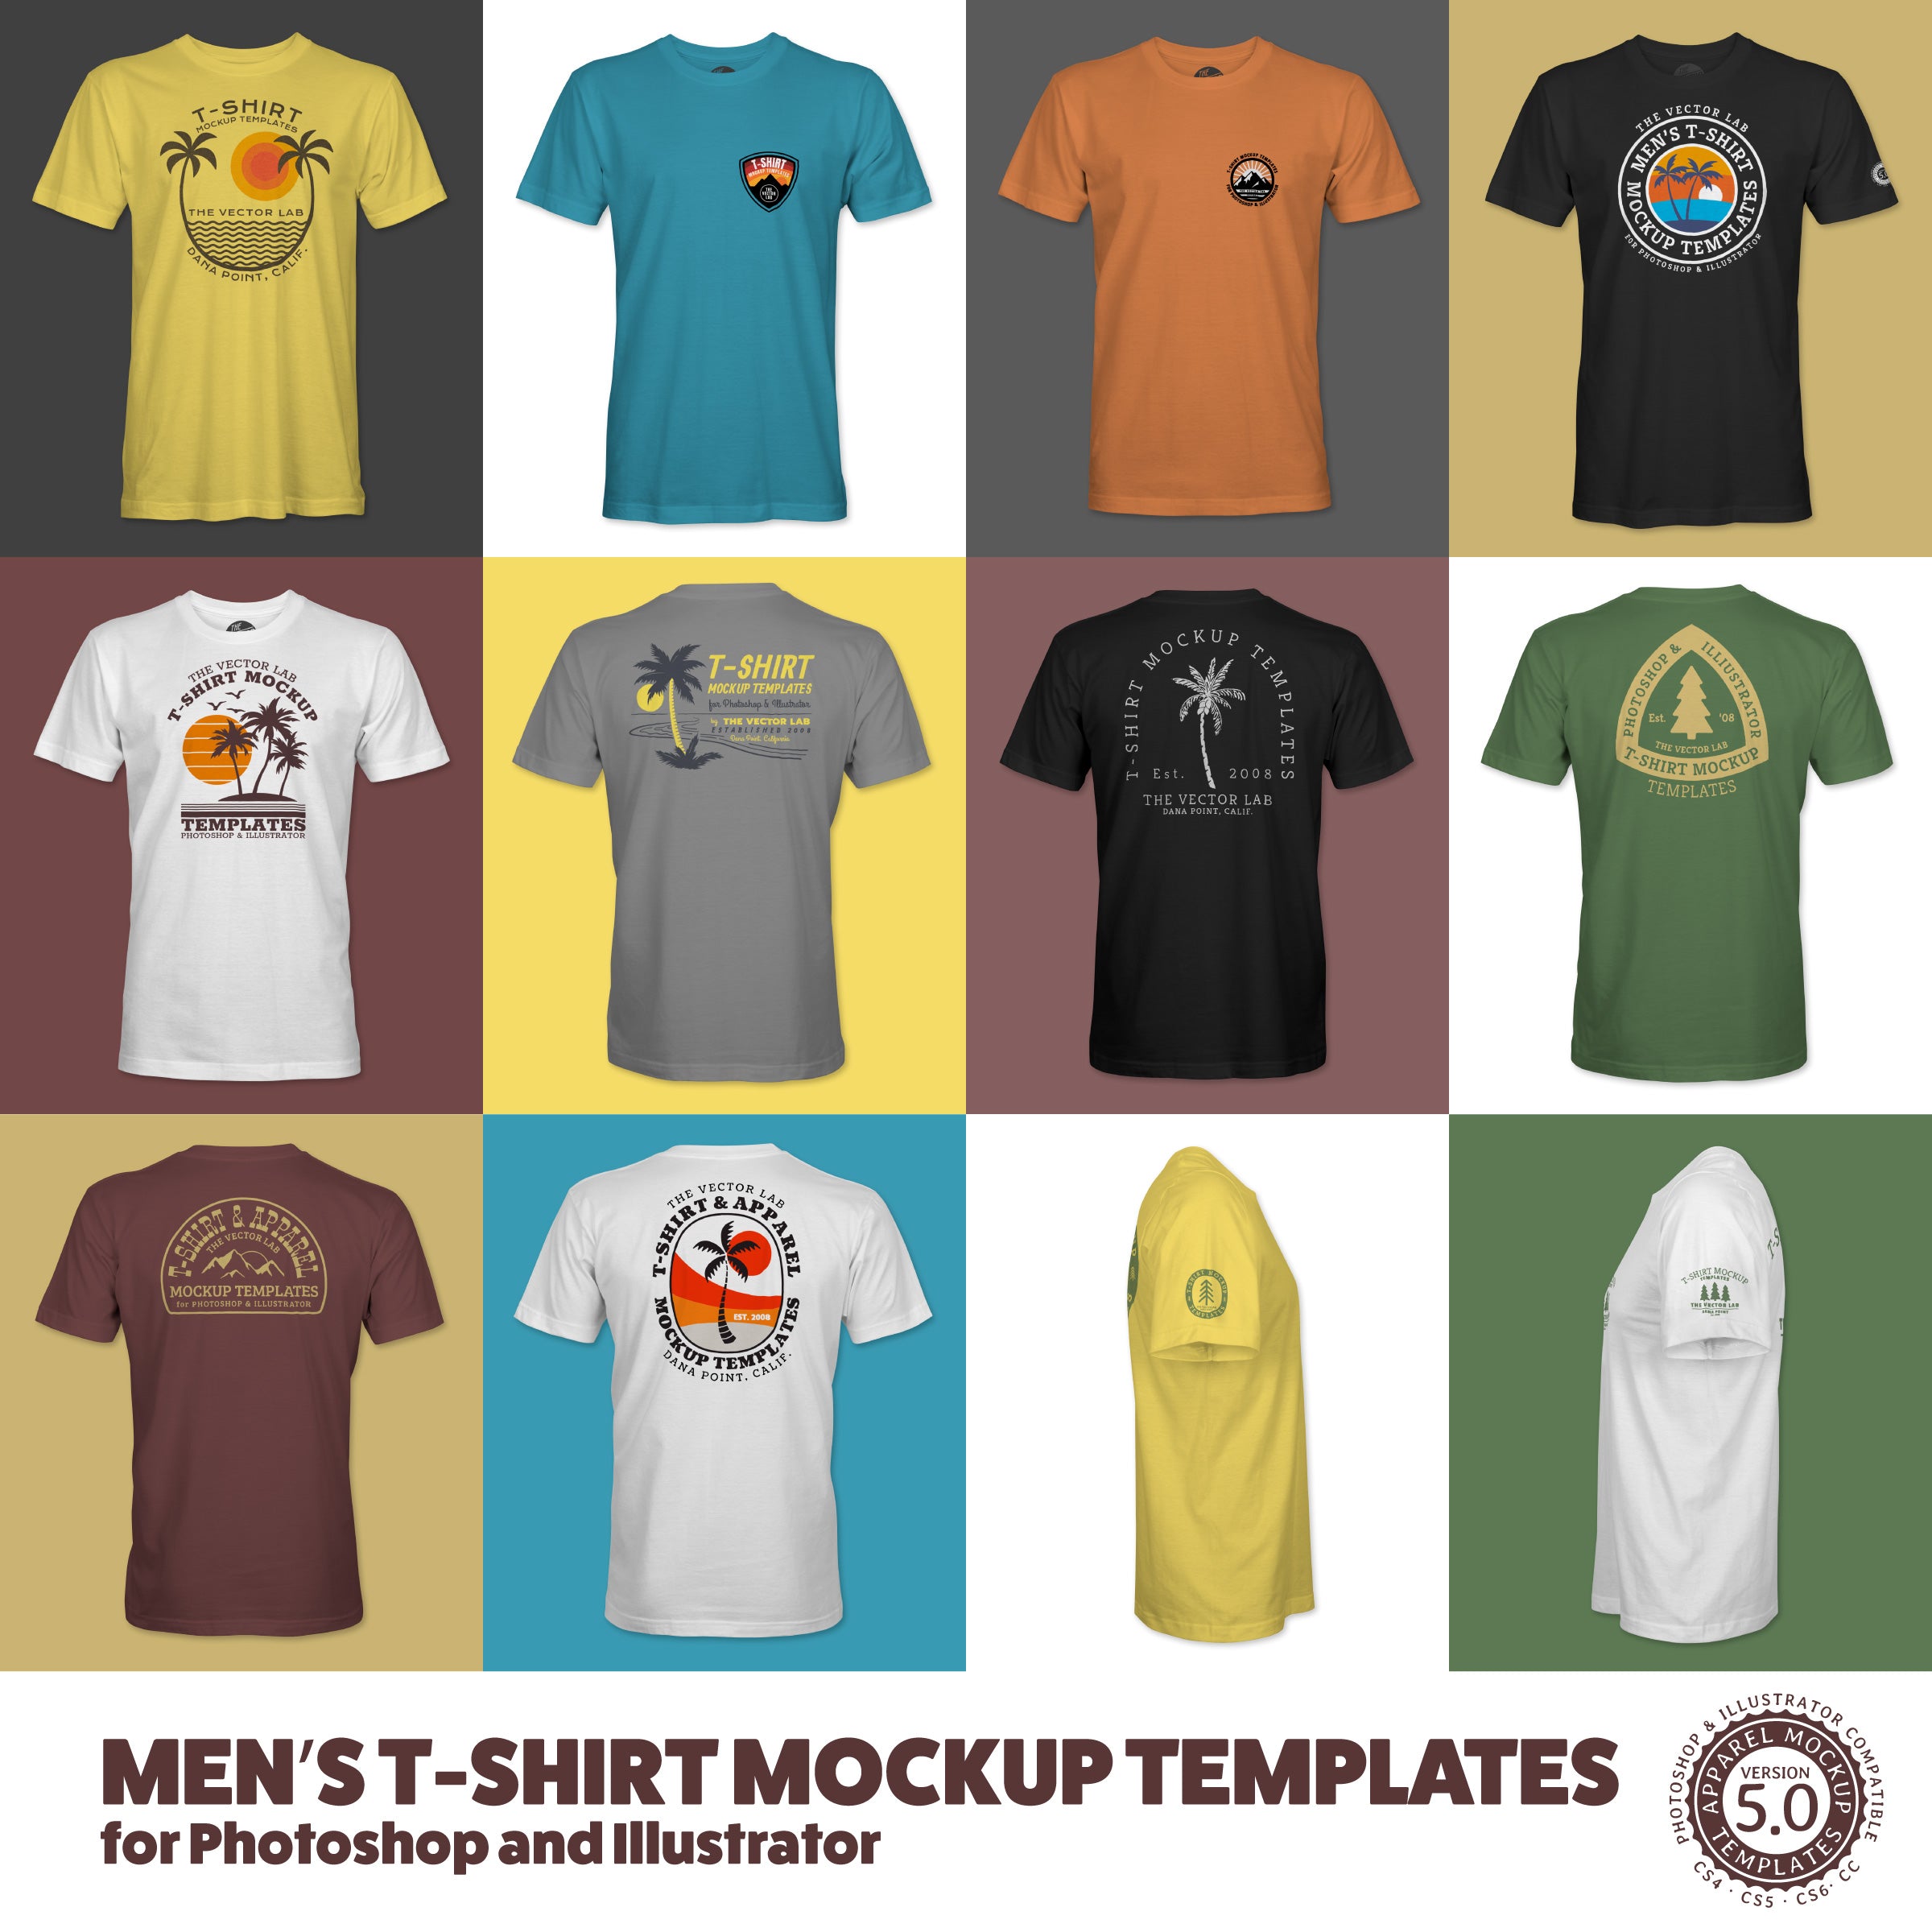 Free Vector  Men's blue t-shirt in different views with realistic style